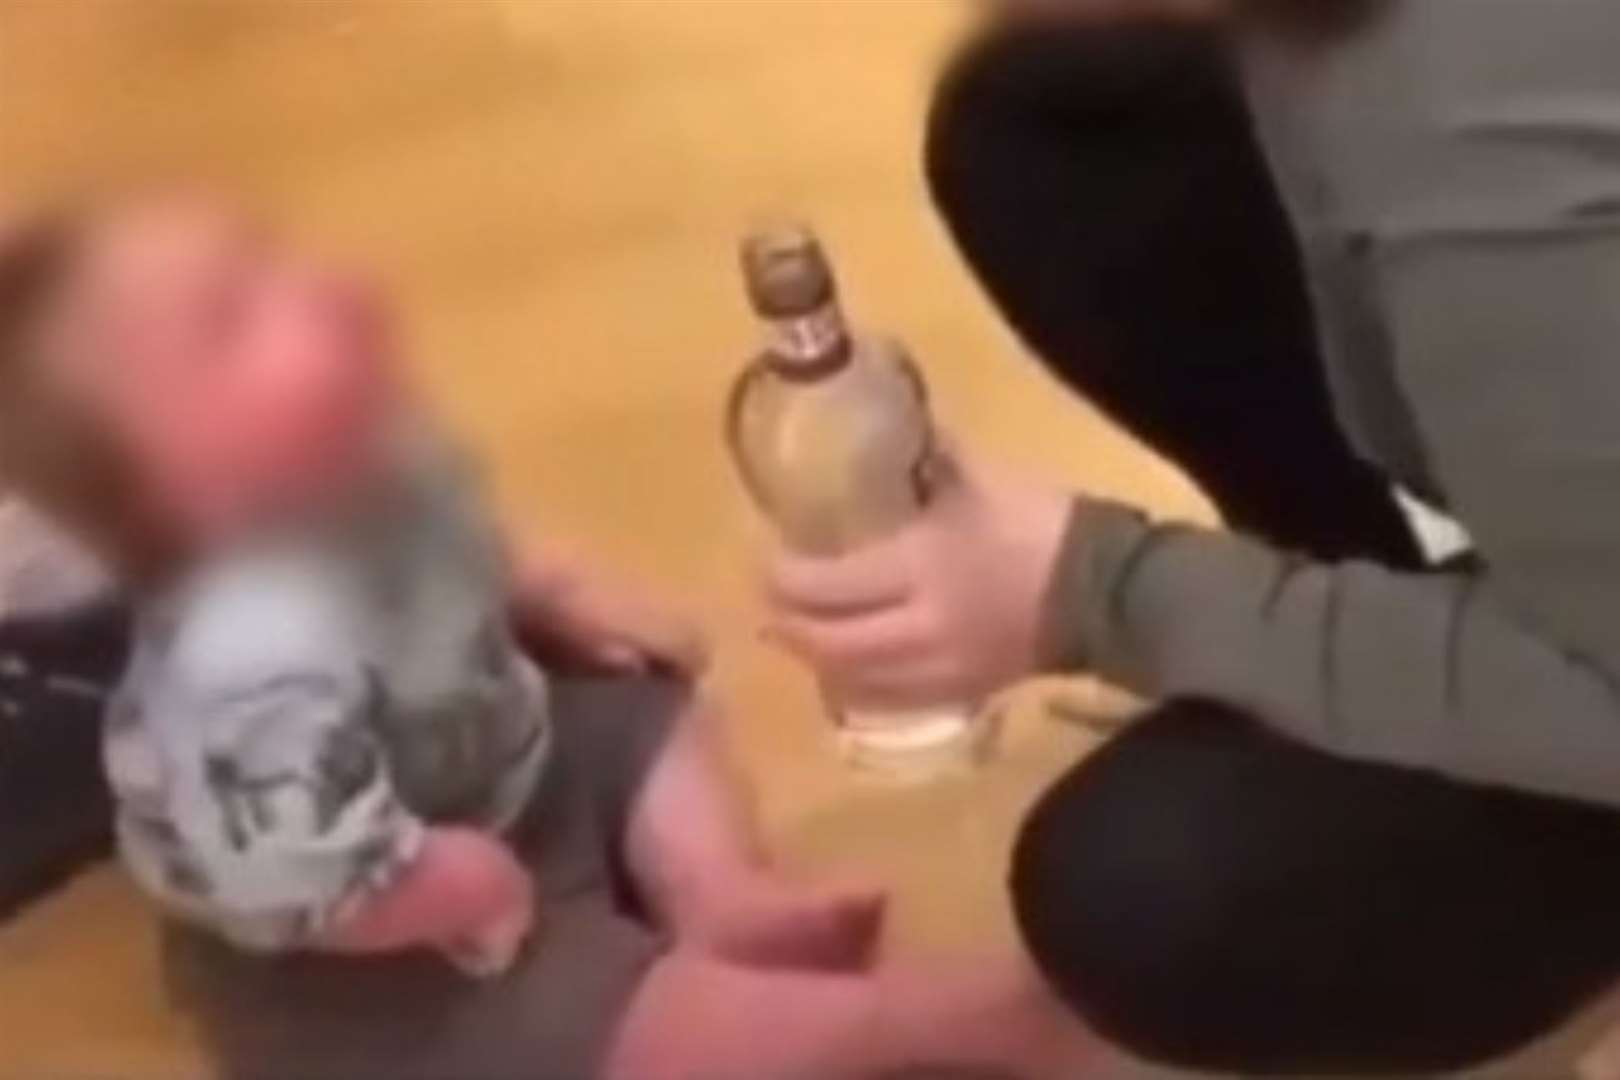 Two people were arrested after a video of a baby being given vodka appeared online